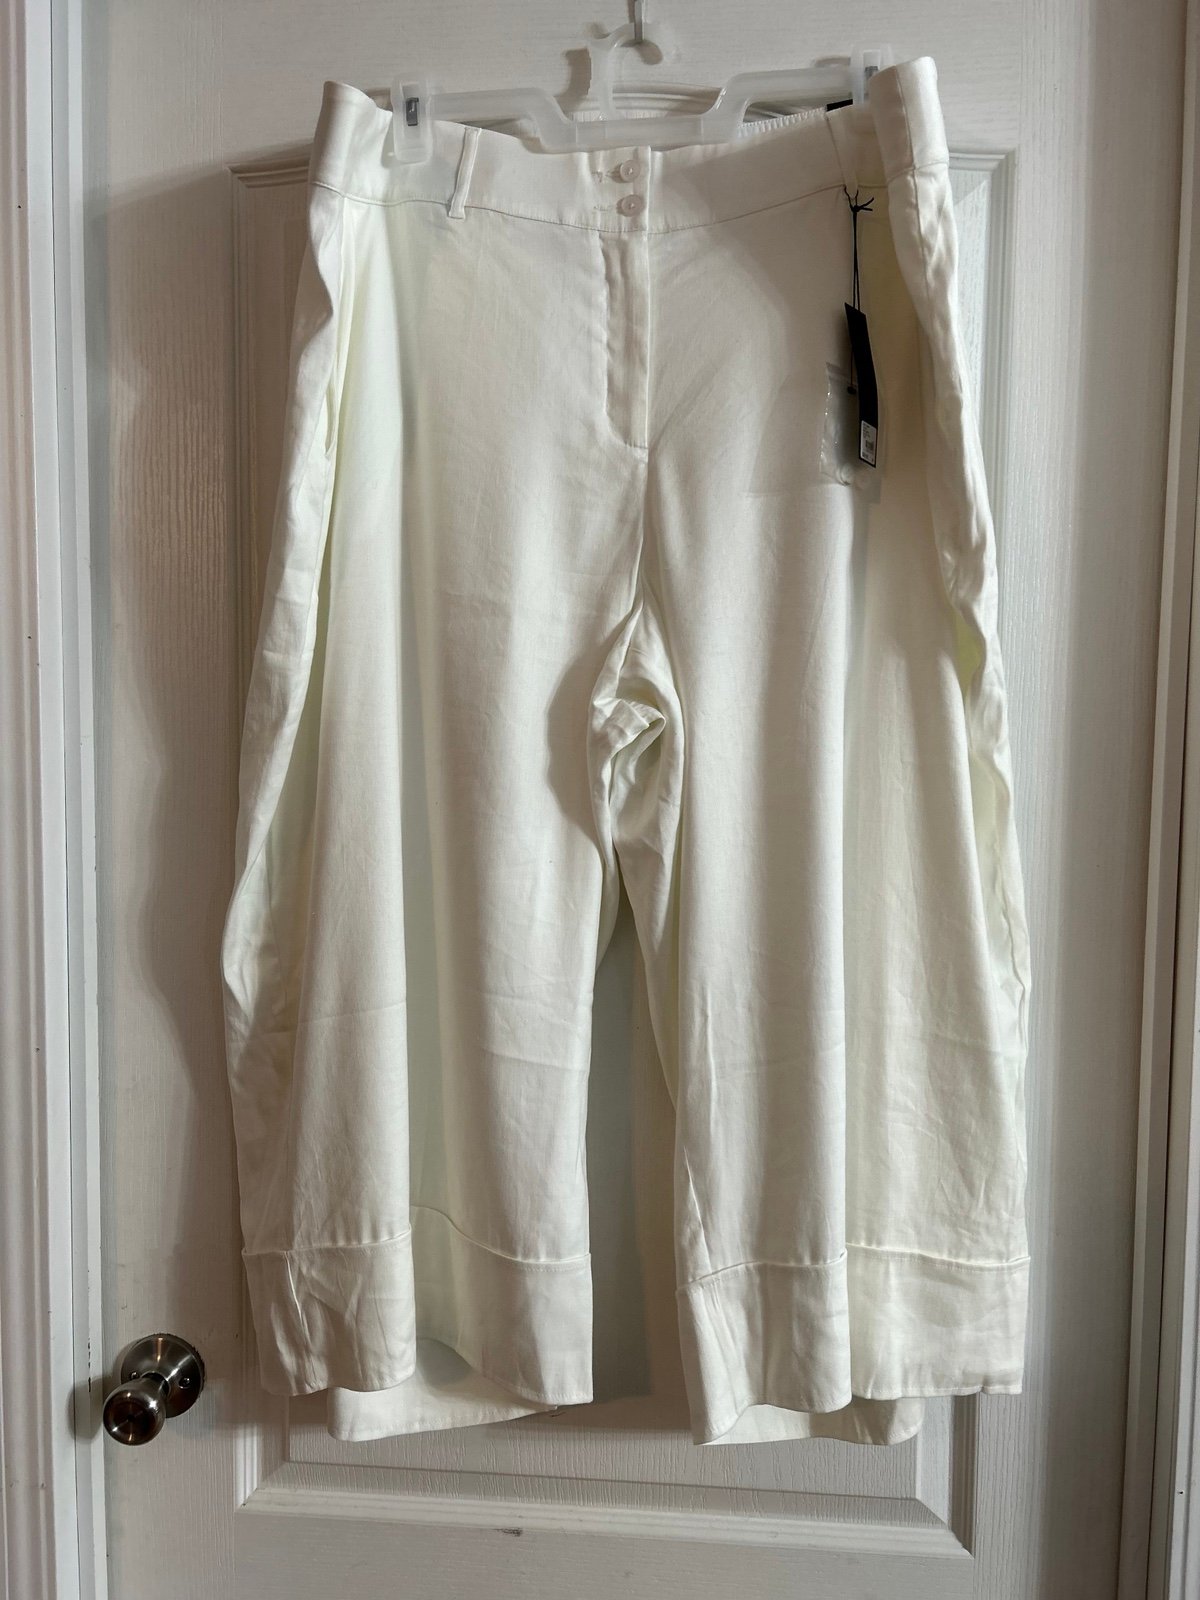 where to buy  Lane Bryant Capris The Lena Size 28 New With Tags G7fvVmj8r Store Online